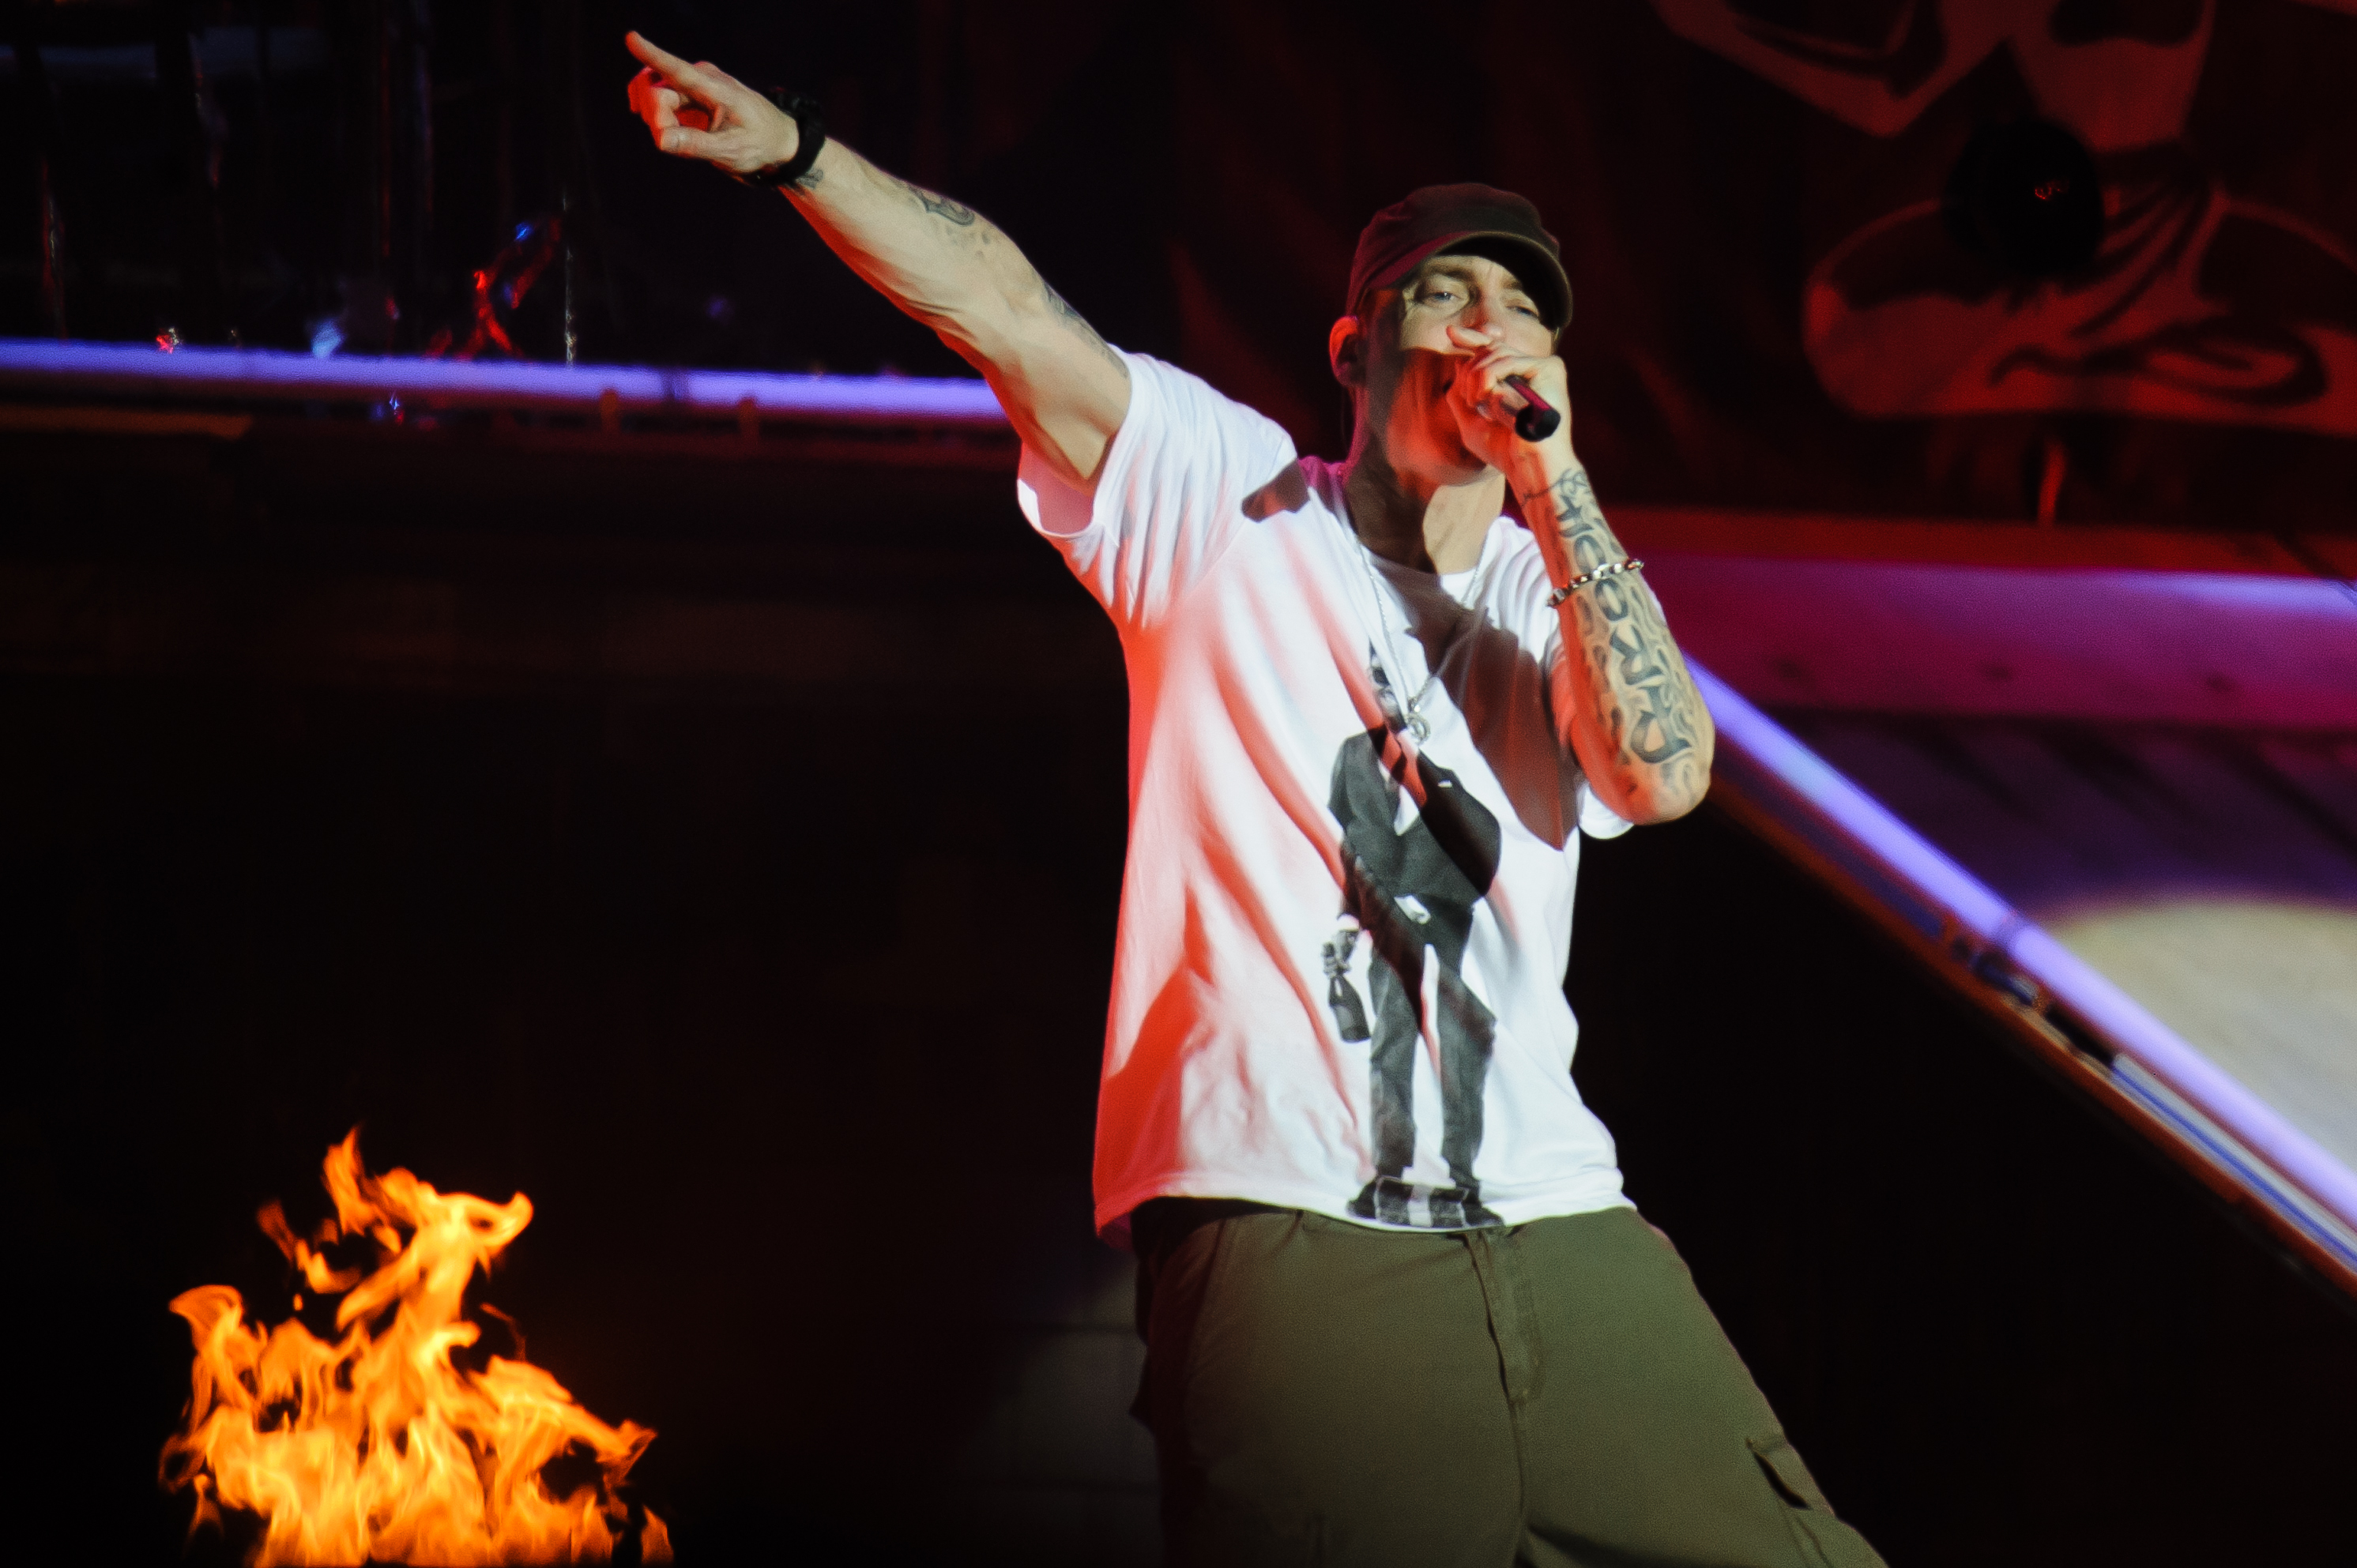 Eminem performs on stage on Day 2 of Reading Festival 2013 at Richfield Avenue on August 24, 2013 in Reading, England. (Joseph Okpako&mdash;Redferns via Getty Images)